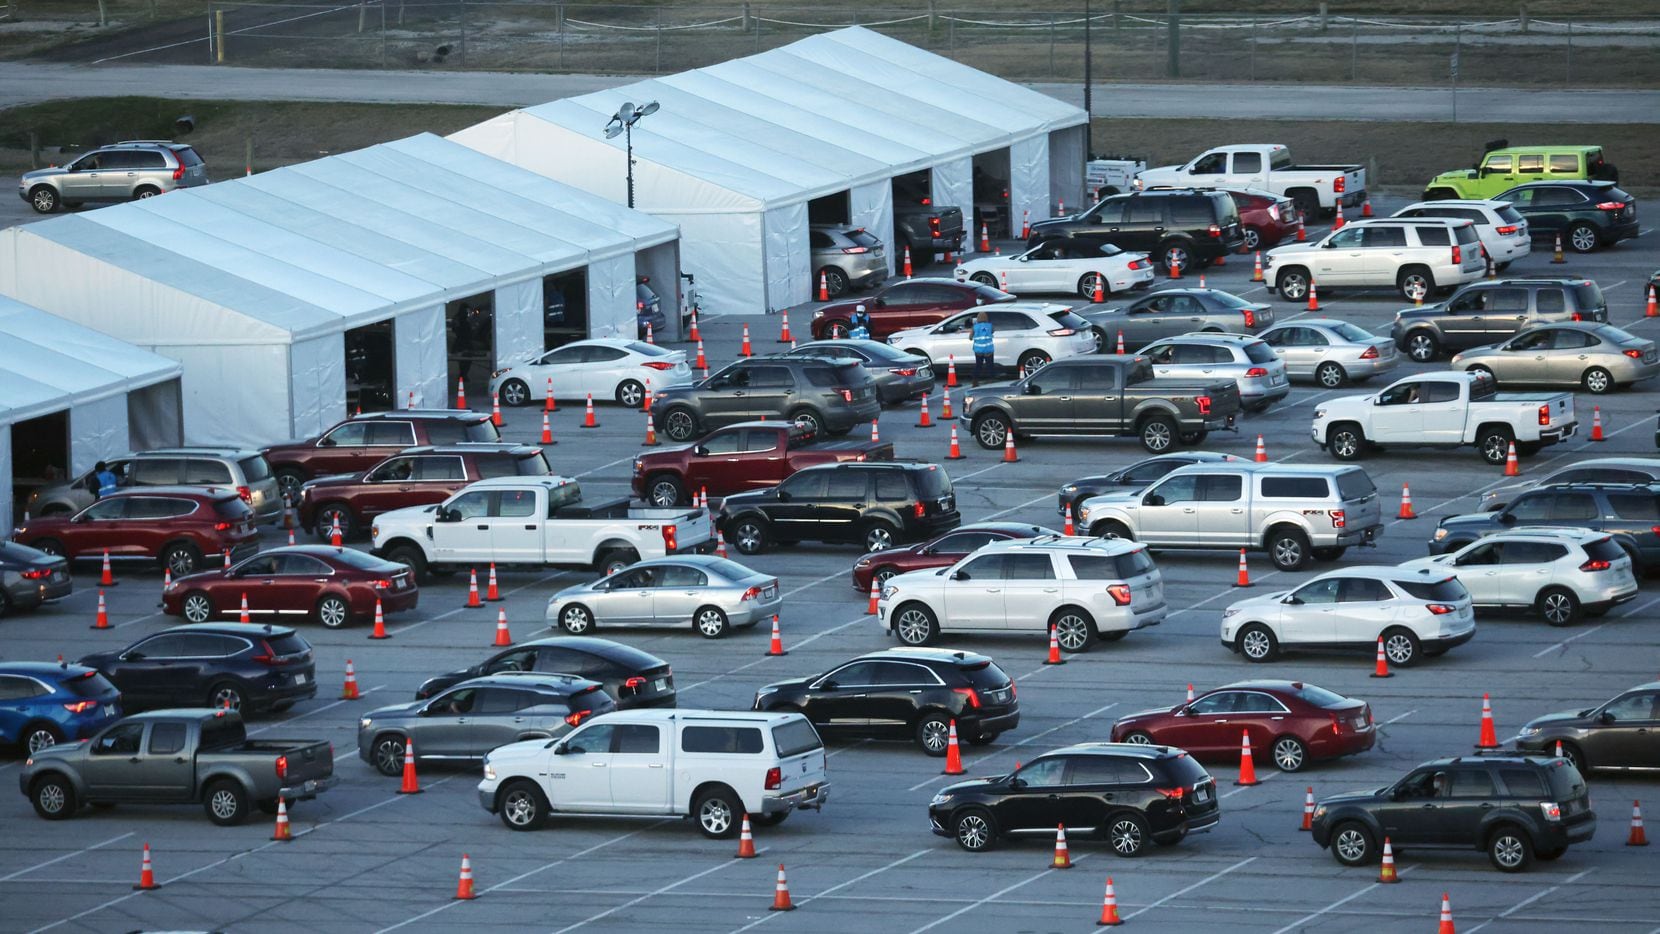 Vehicles line up at the drive-through COVID-19 vaccination clinic at Texas Motor Speedway in Fort Worth.